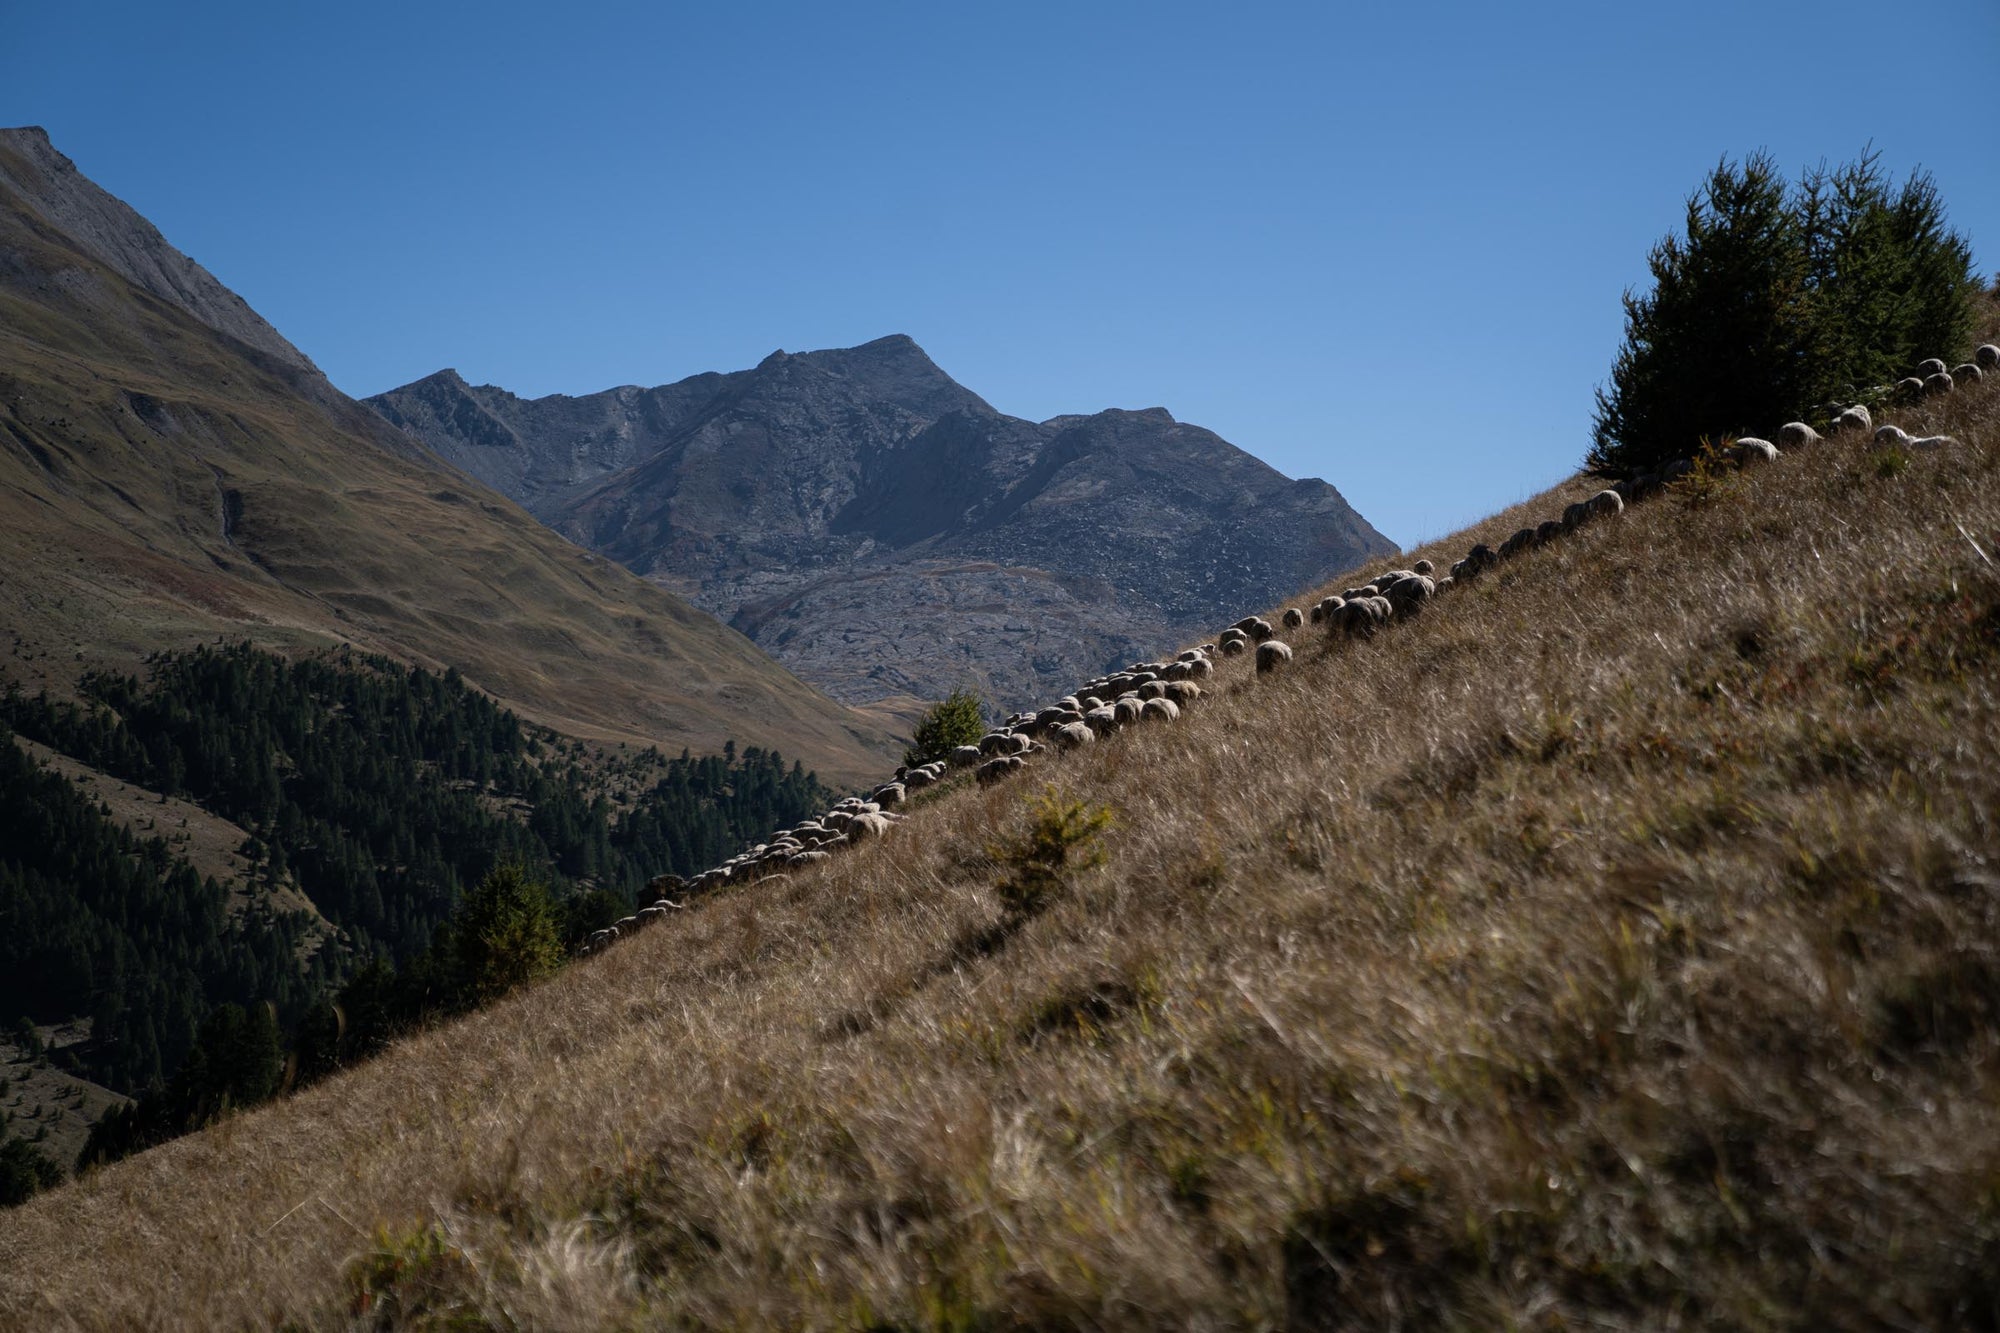 Merino d'Arles sheep grazing on a mountain slope with a backdrop of mountains.